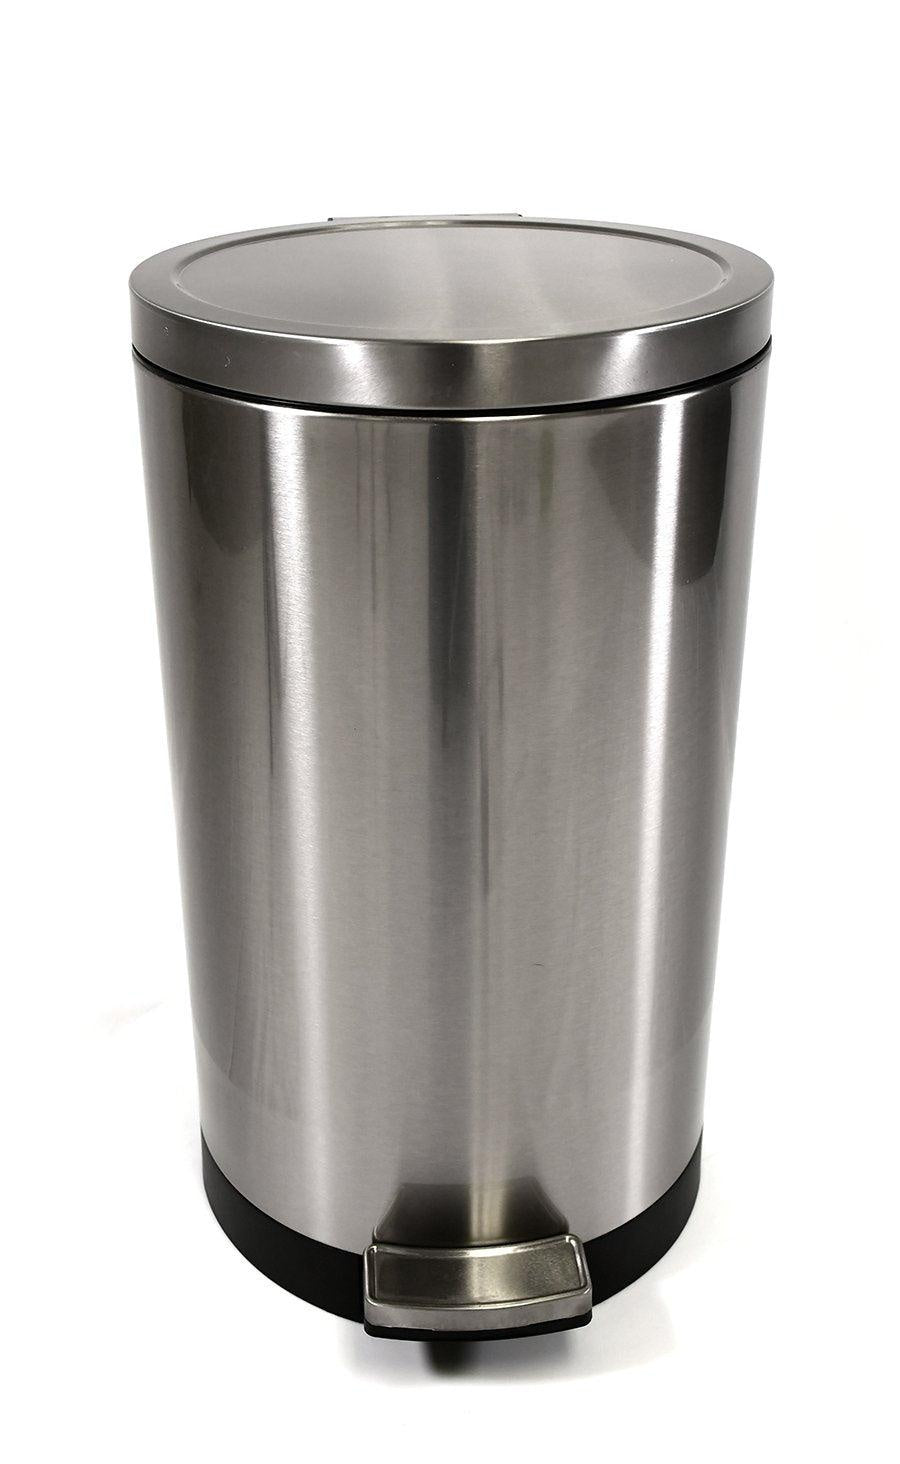 Simplykleen Kleen-Fit 11.8-Gallon Semi-Round Stainless Steel Trash Can with Lid, Silver